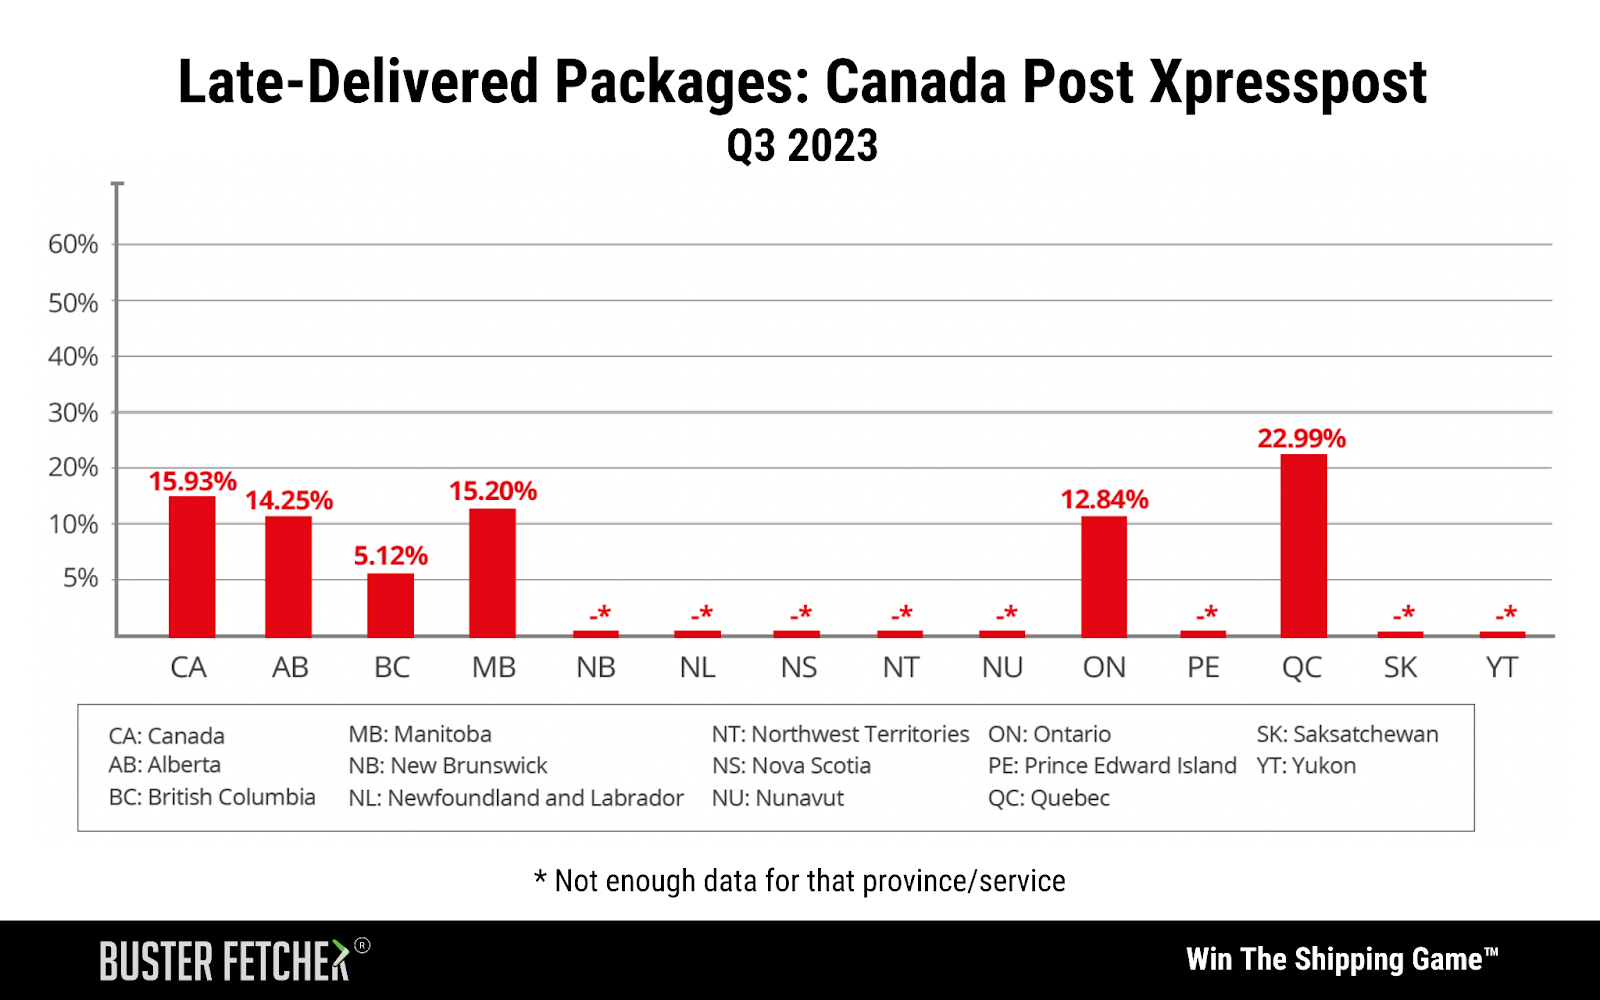 Late-Delivered Packages: Canada Post Xpresspost